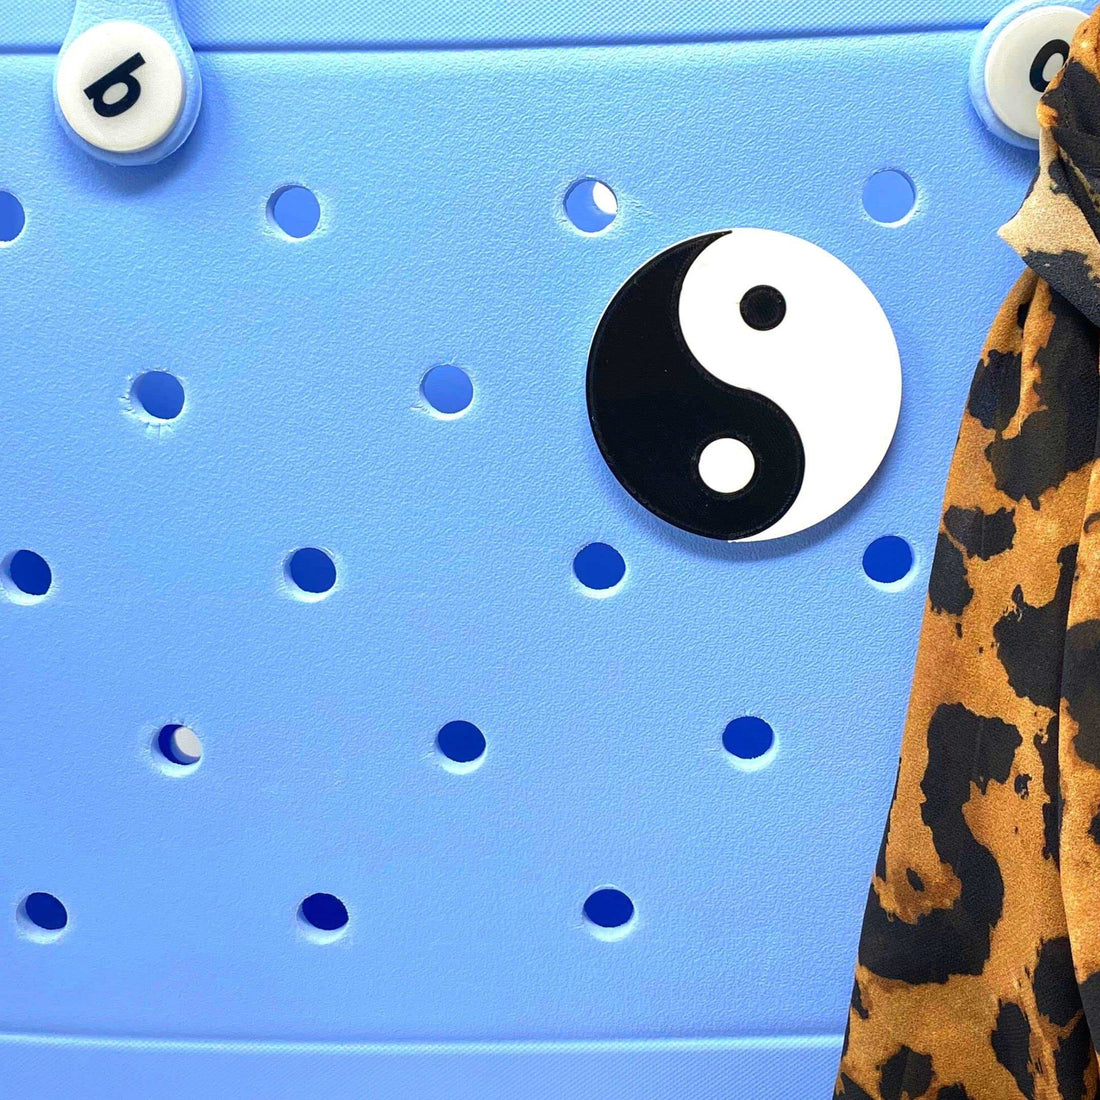 BOGLETS - Yin and Yang Charm Compatible with Bogg Bags, Simply Southern and Other Similar Tote Bags.